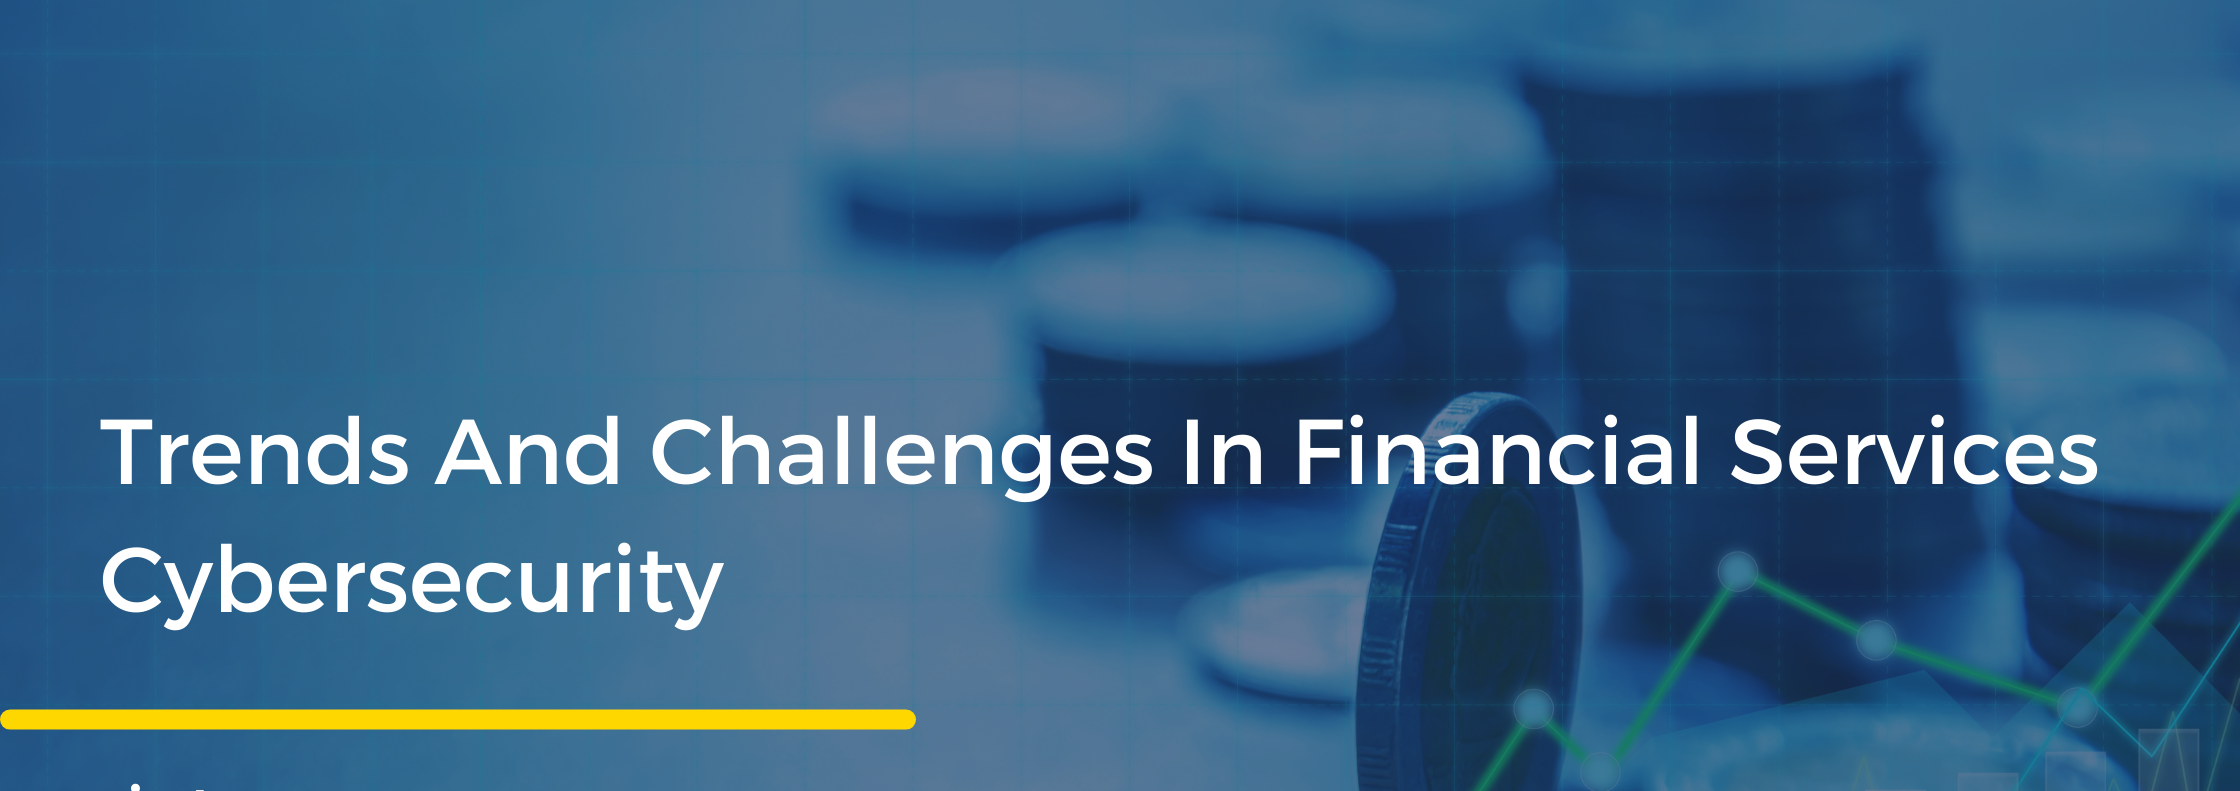 Trends and Challenges in Financial Services Cybersecurity